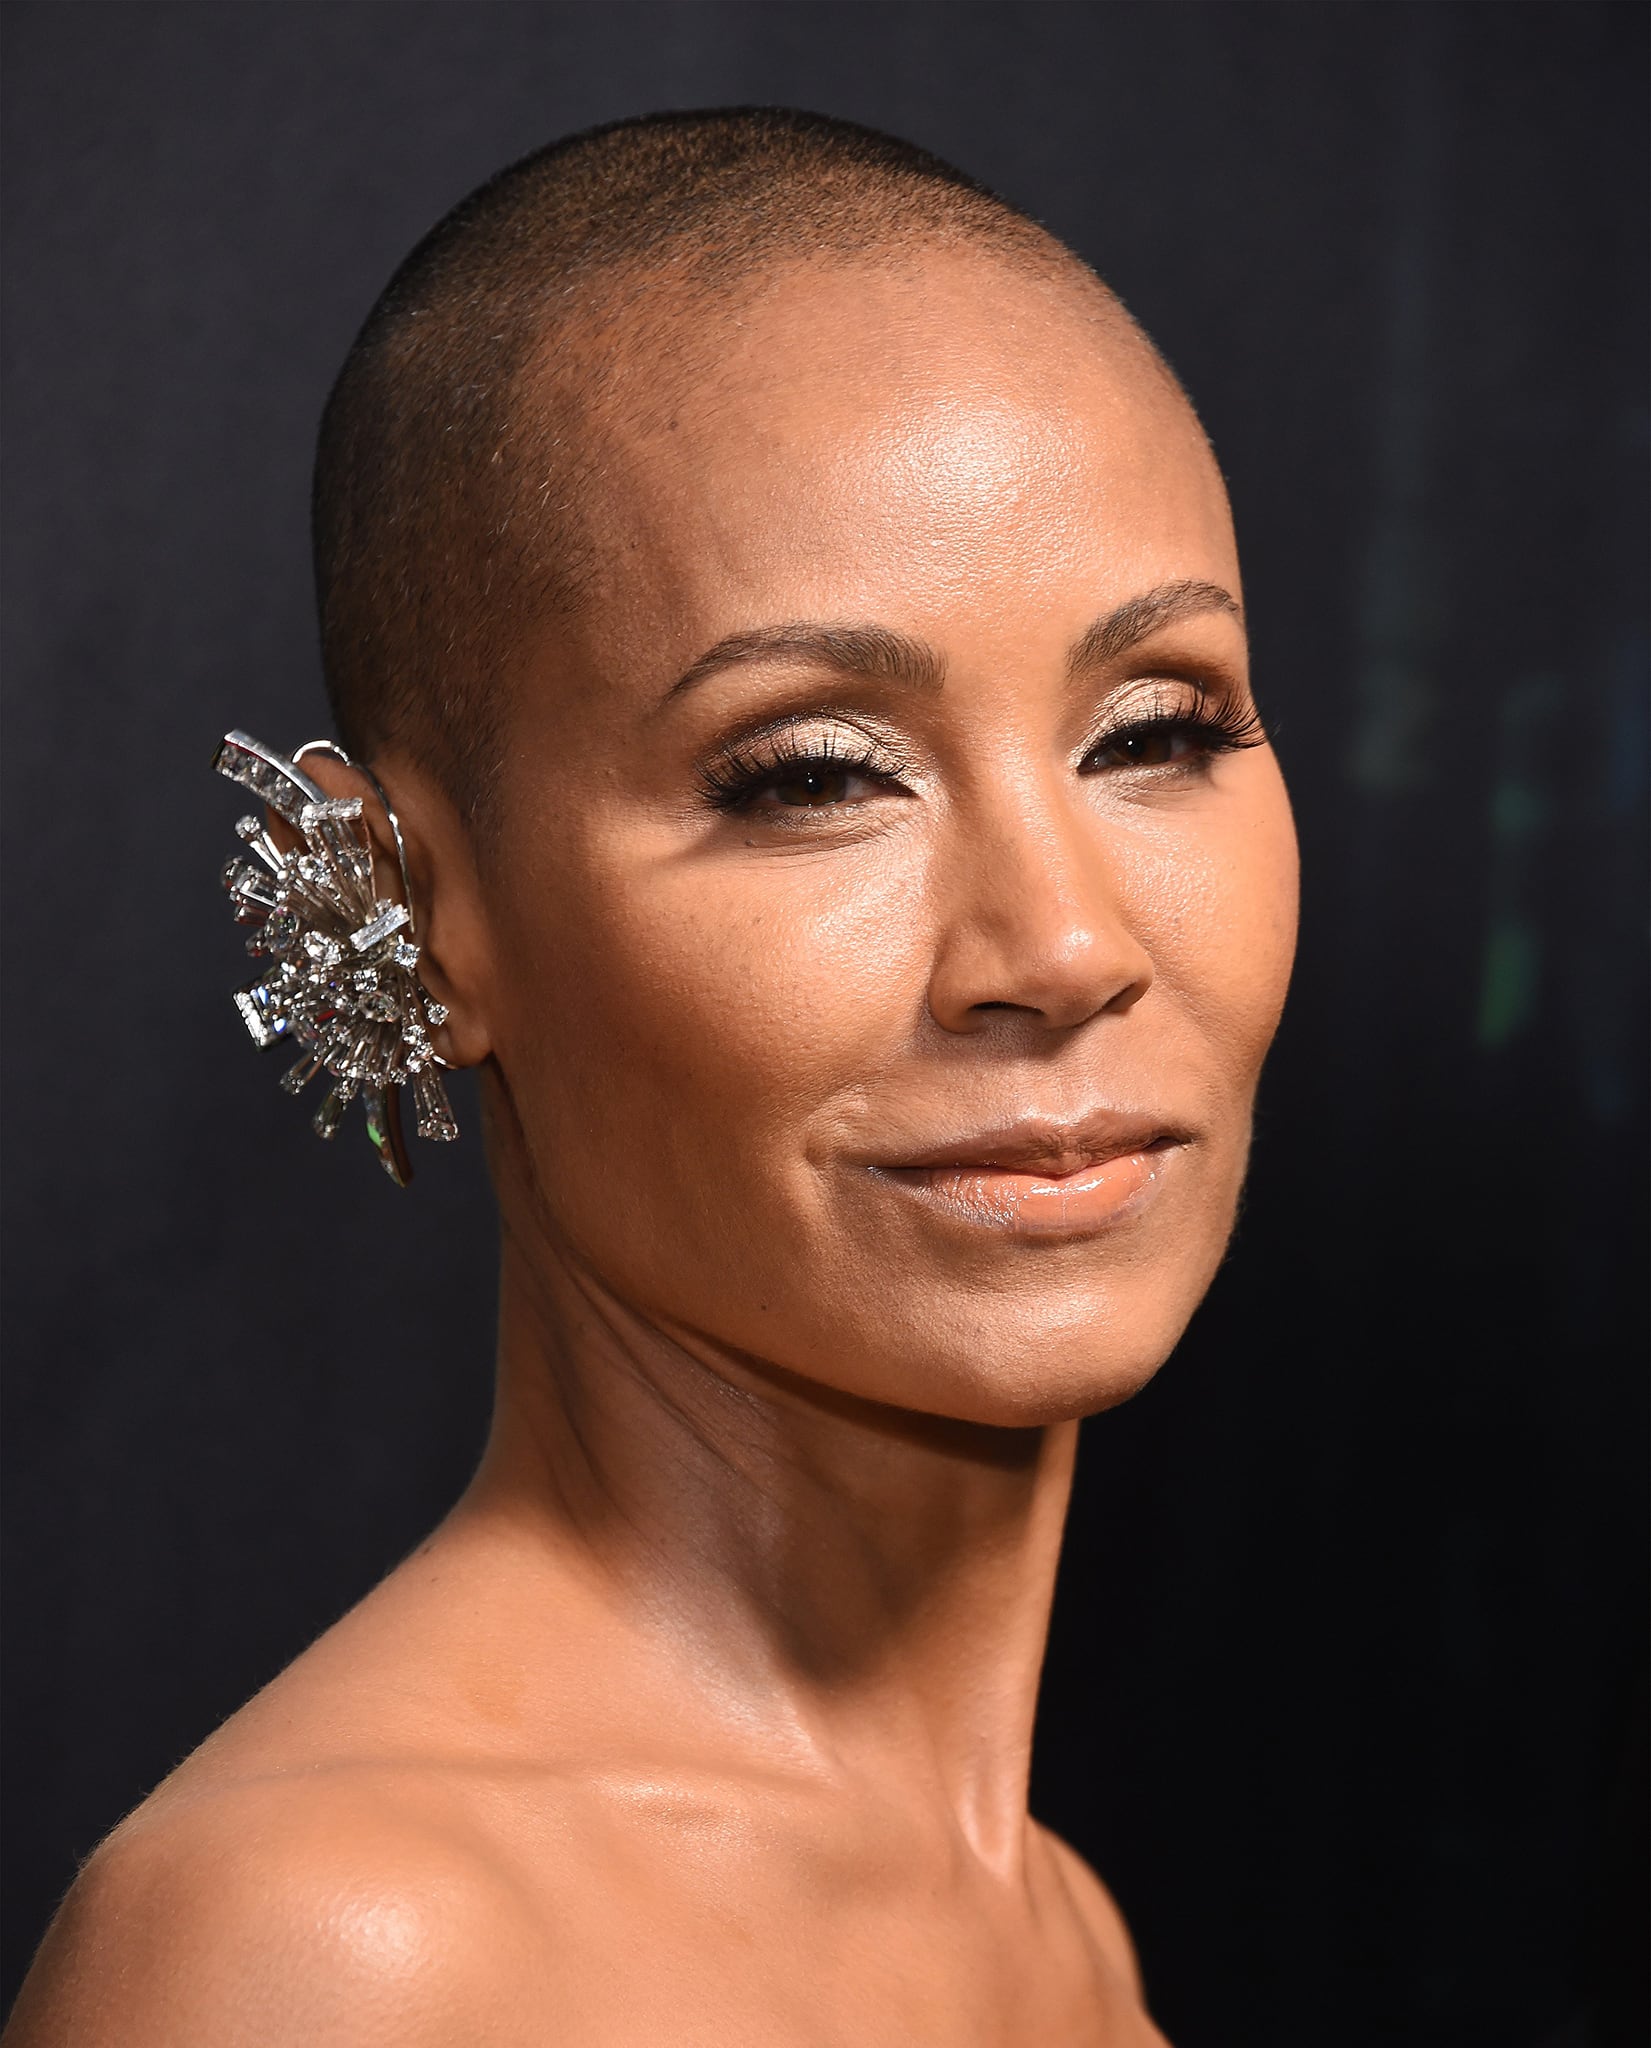 Jada Pinkett Smith wears buzz-cut hair and neutral makeup and adds edge to her look with a Swarovski ear cuff